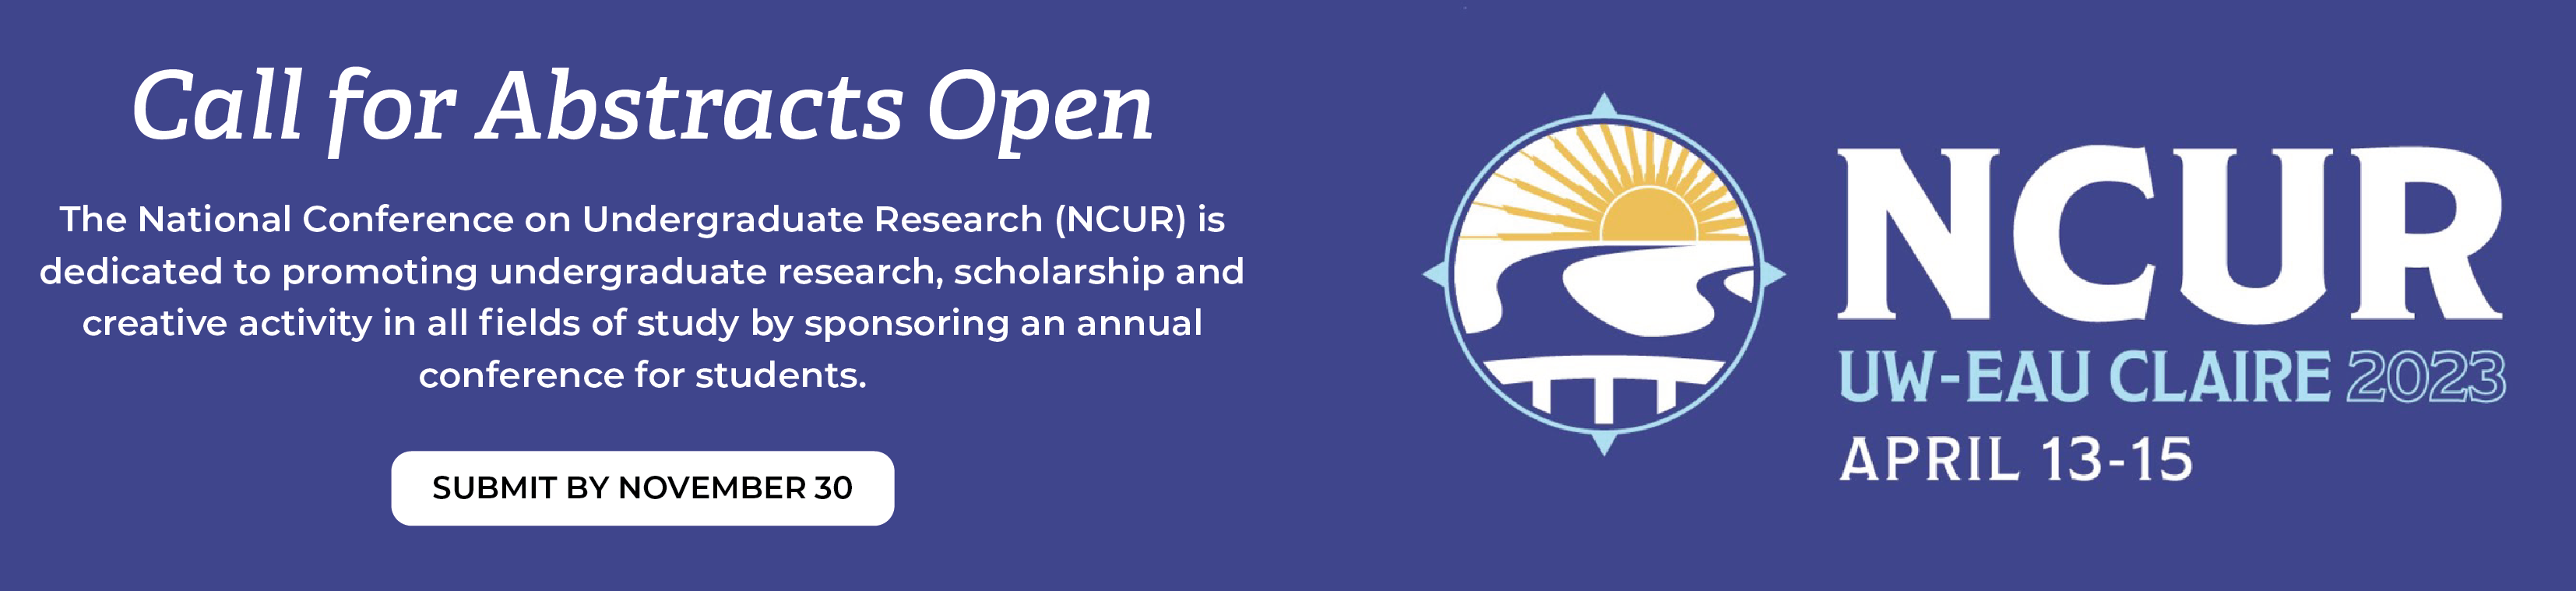 NCUR call for abstracts open